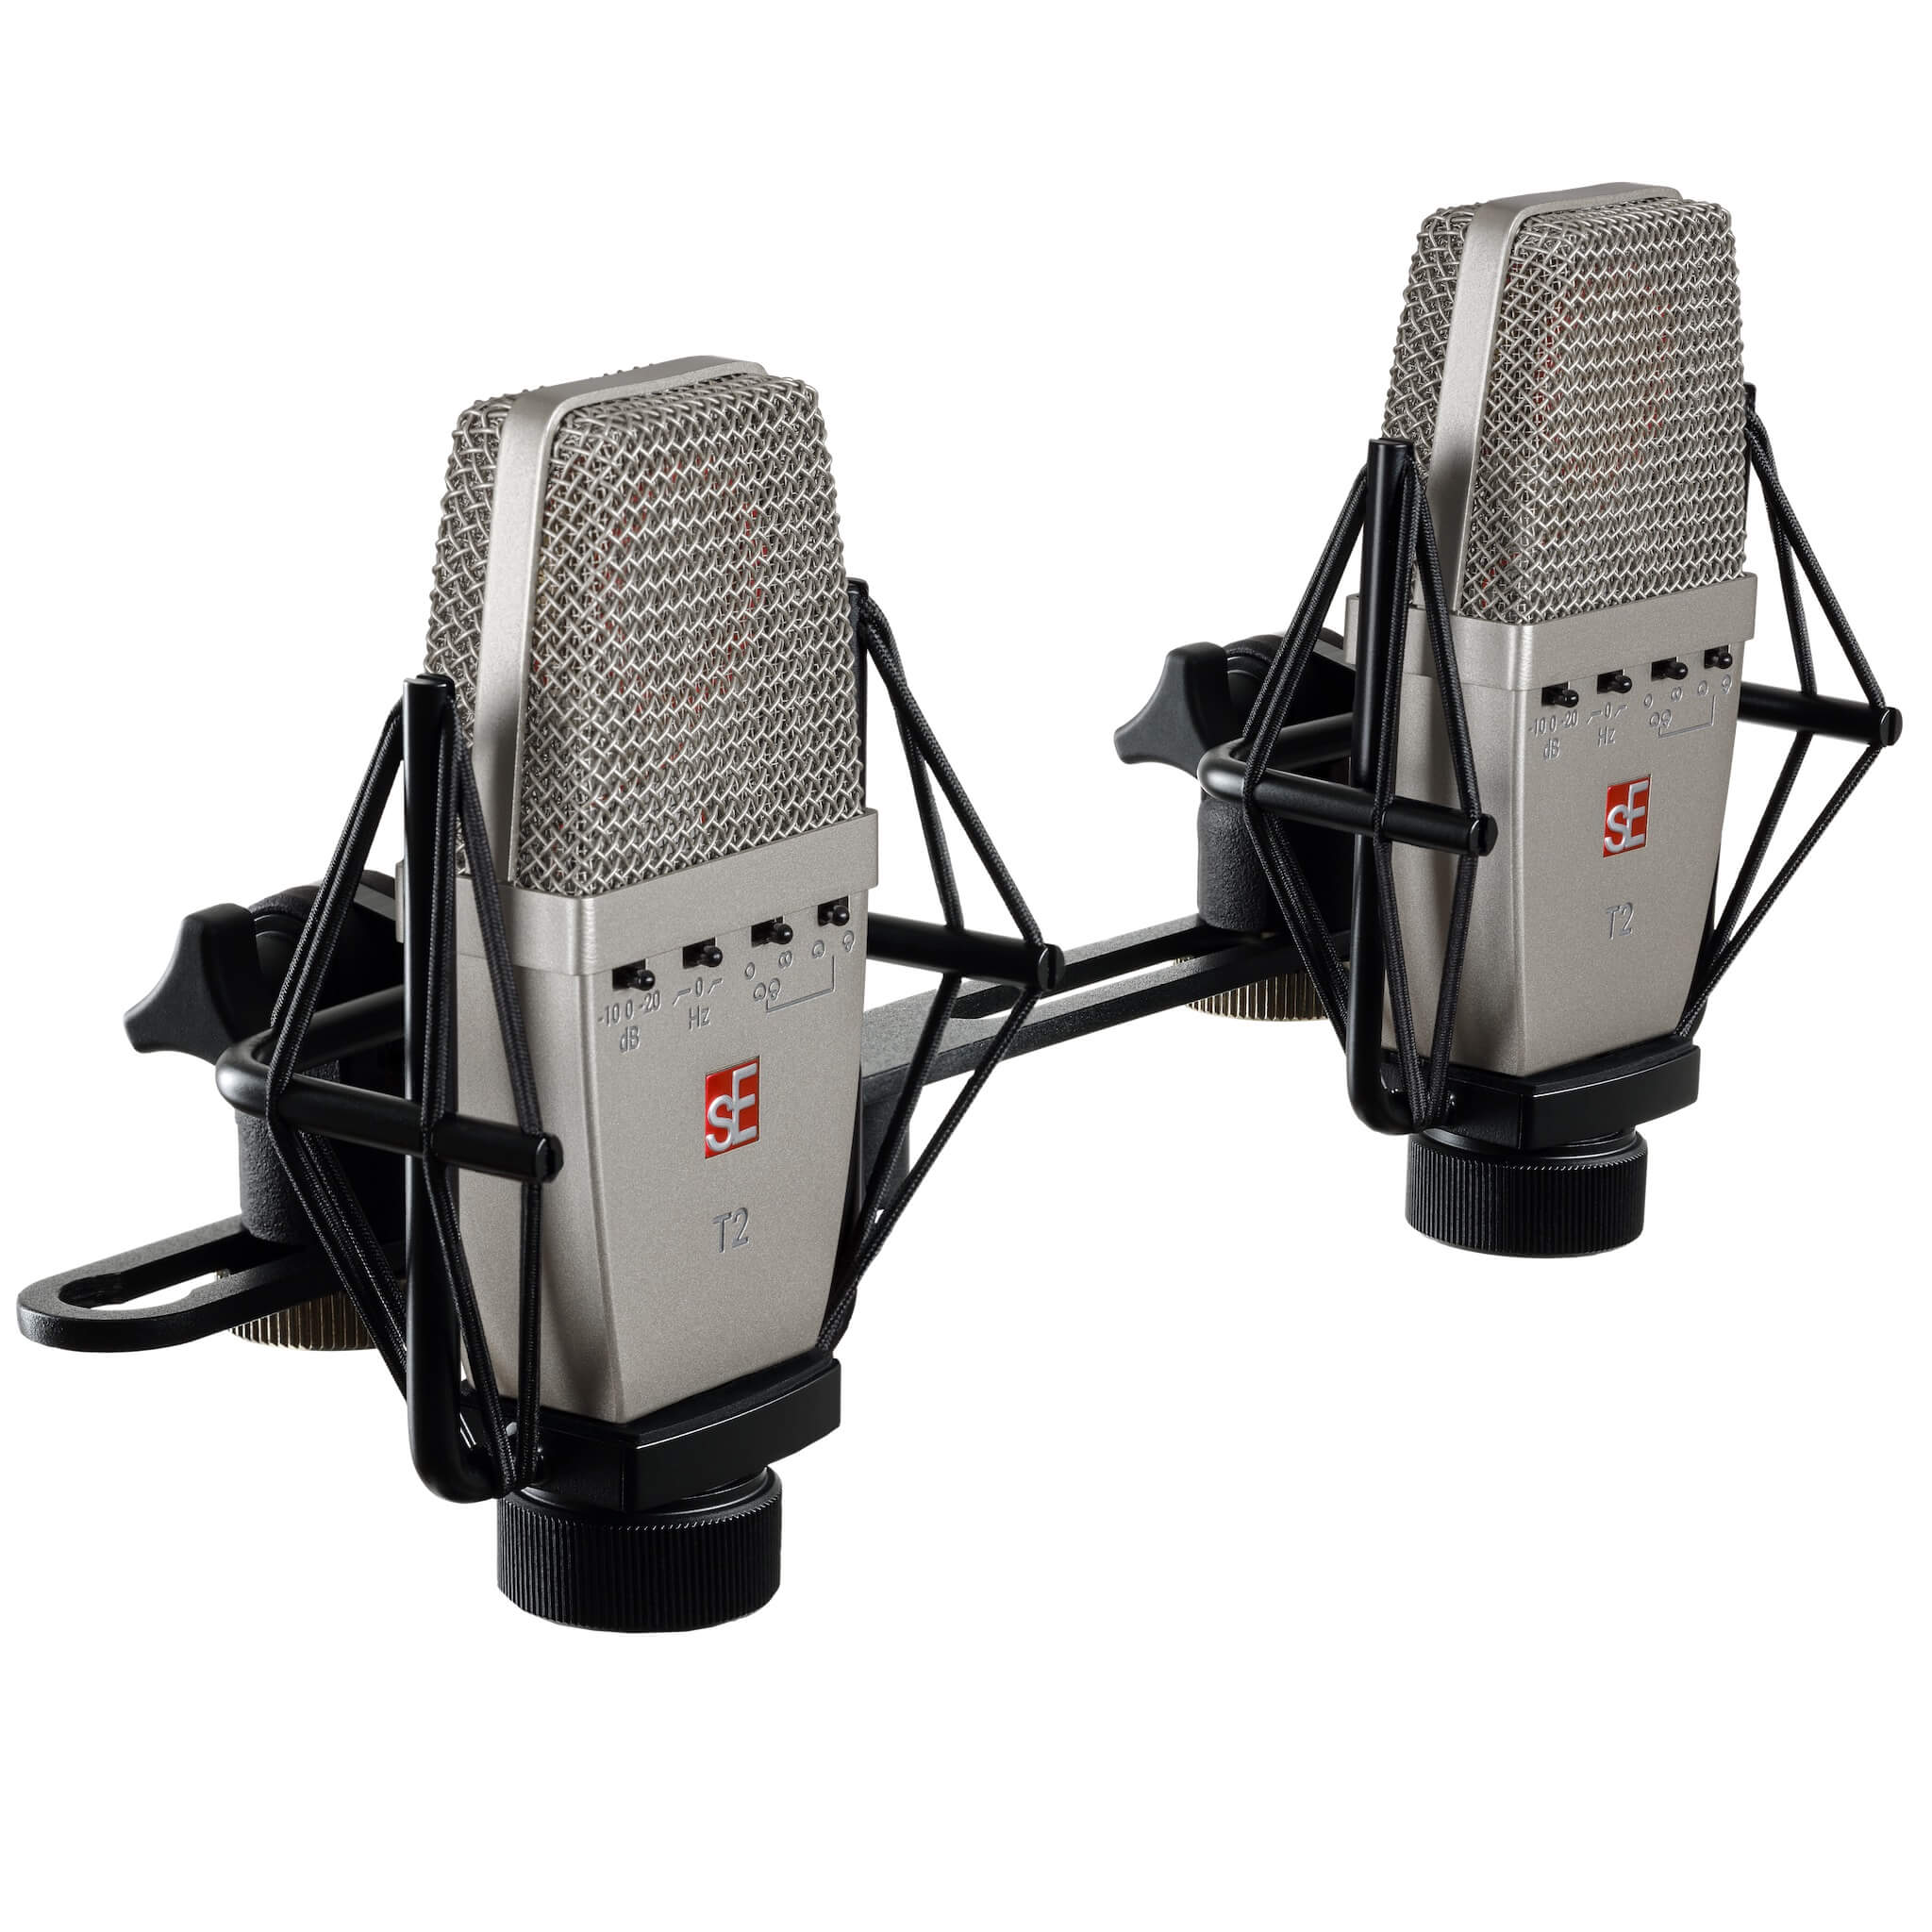 sE Electronics T2 (P) - Factory Matched Pair of T2 Microphones, shown with included stereo bar and shockmounts